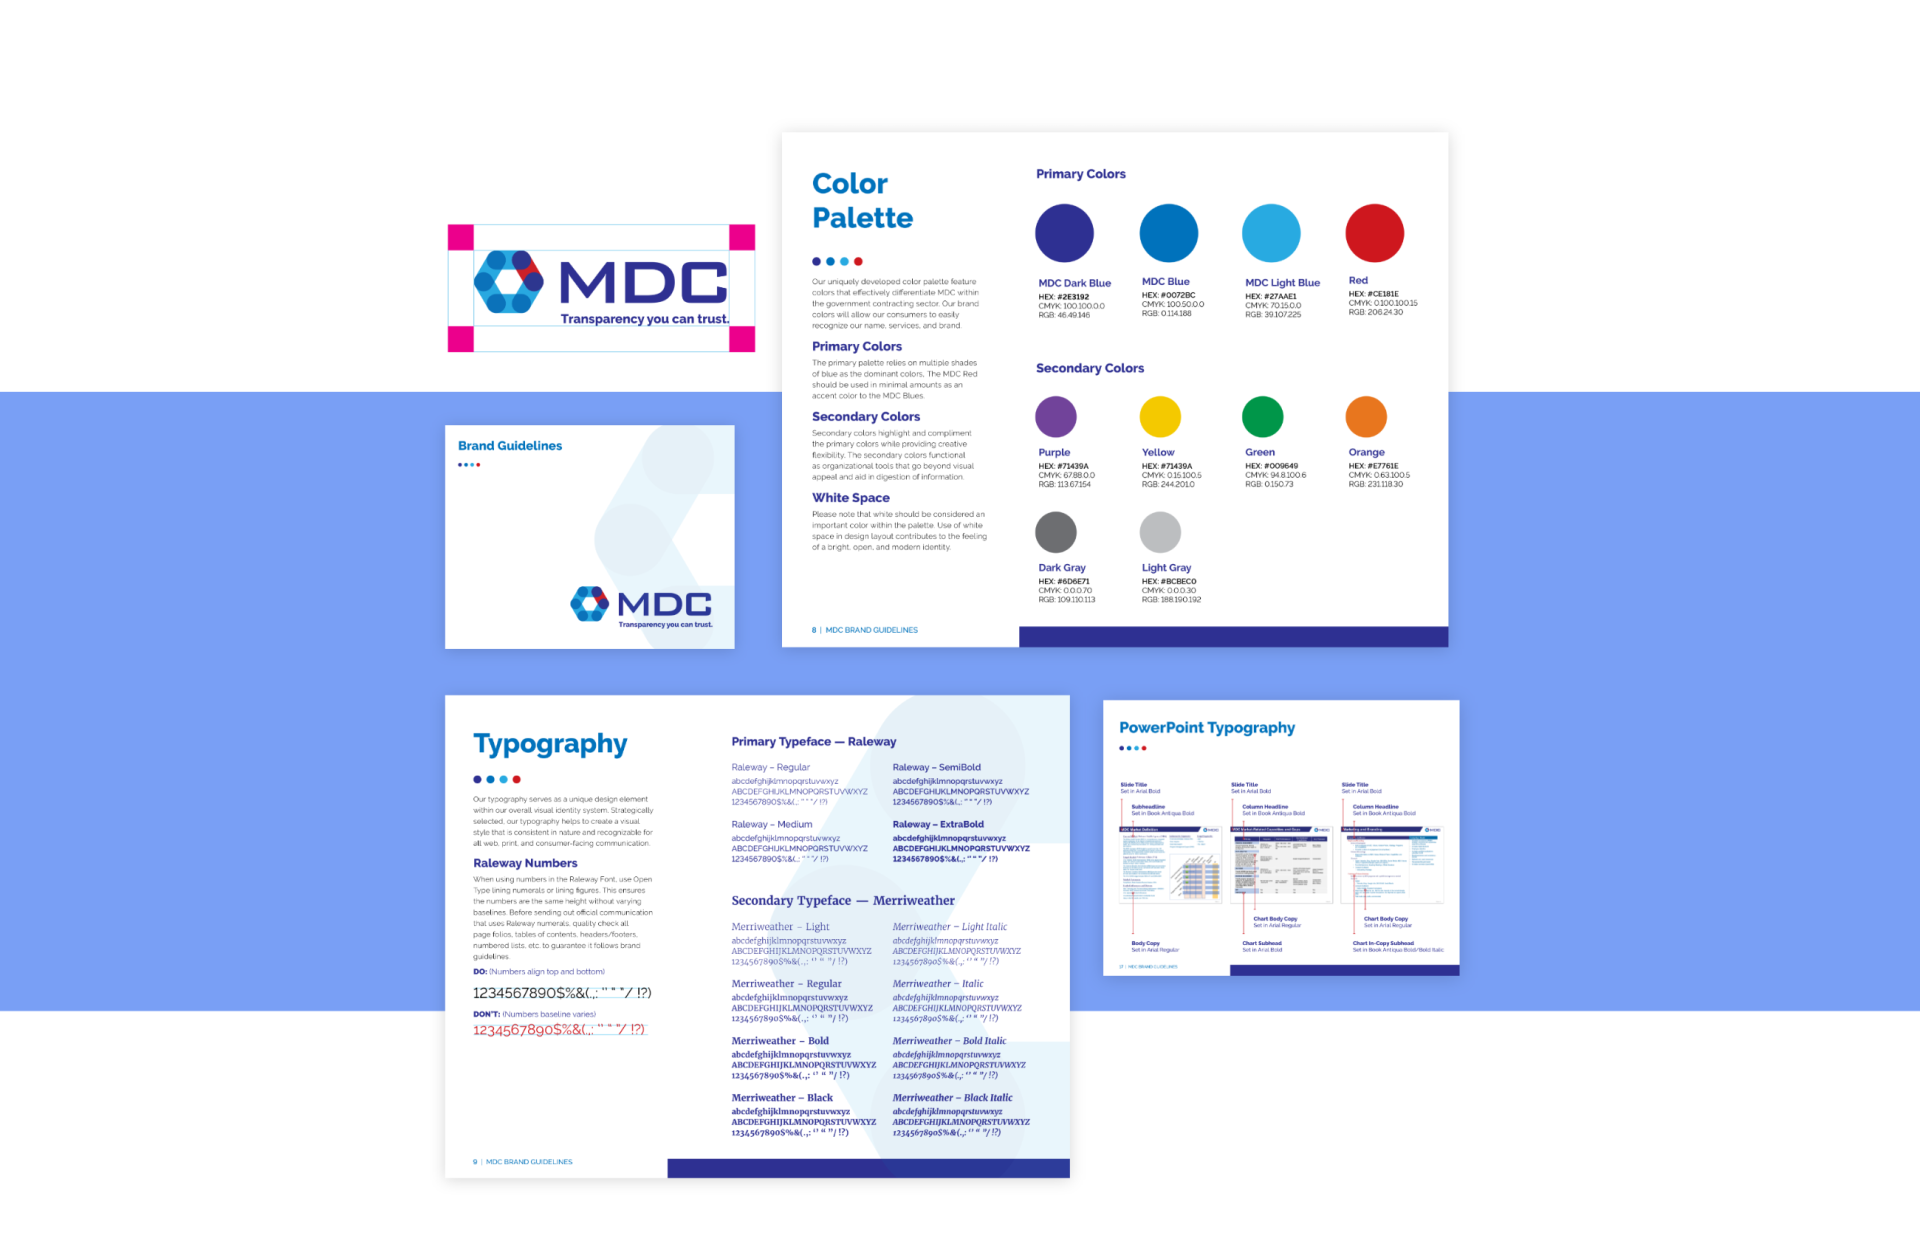 Visual elements of a corporate brand identity system featuring logo design, color palette, and typography guidelines on display for effective brand development.